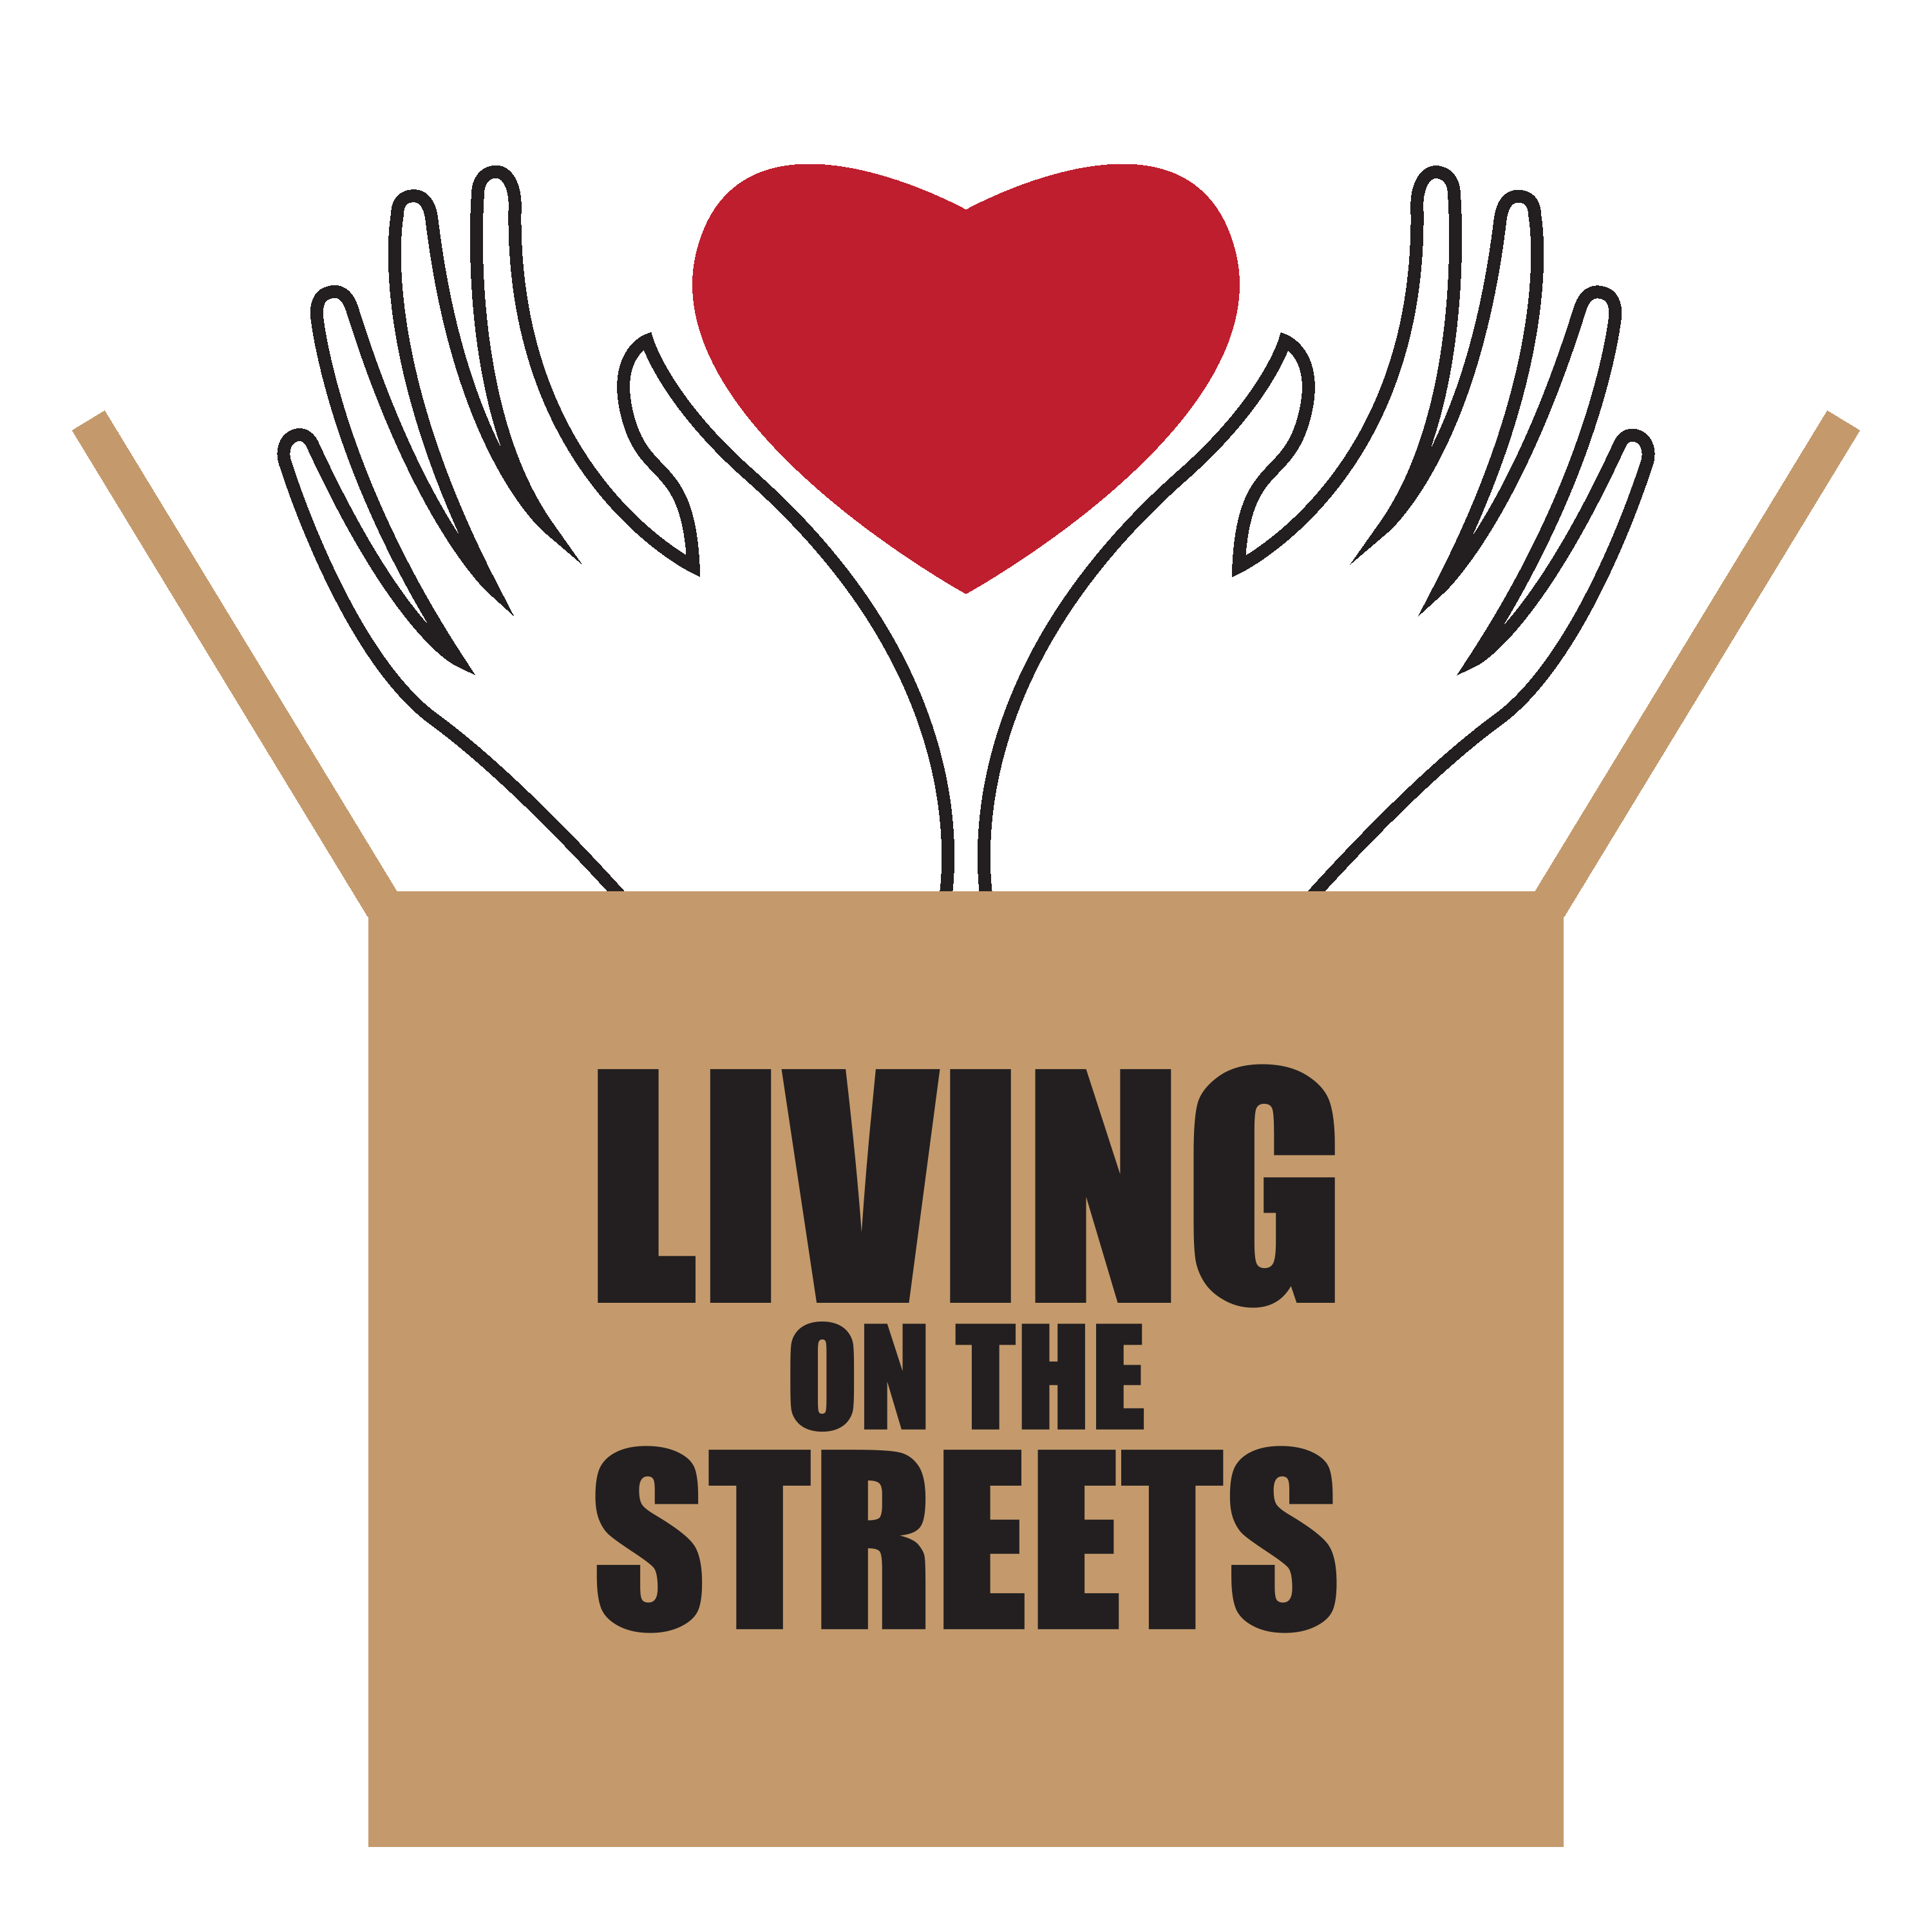 Homeless Logo - Living on the Streets Hands Pantry